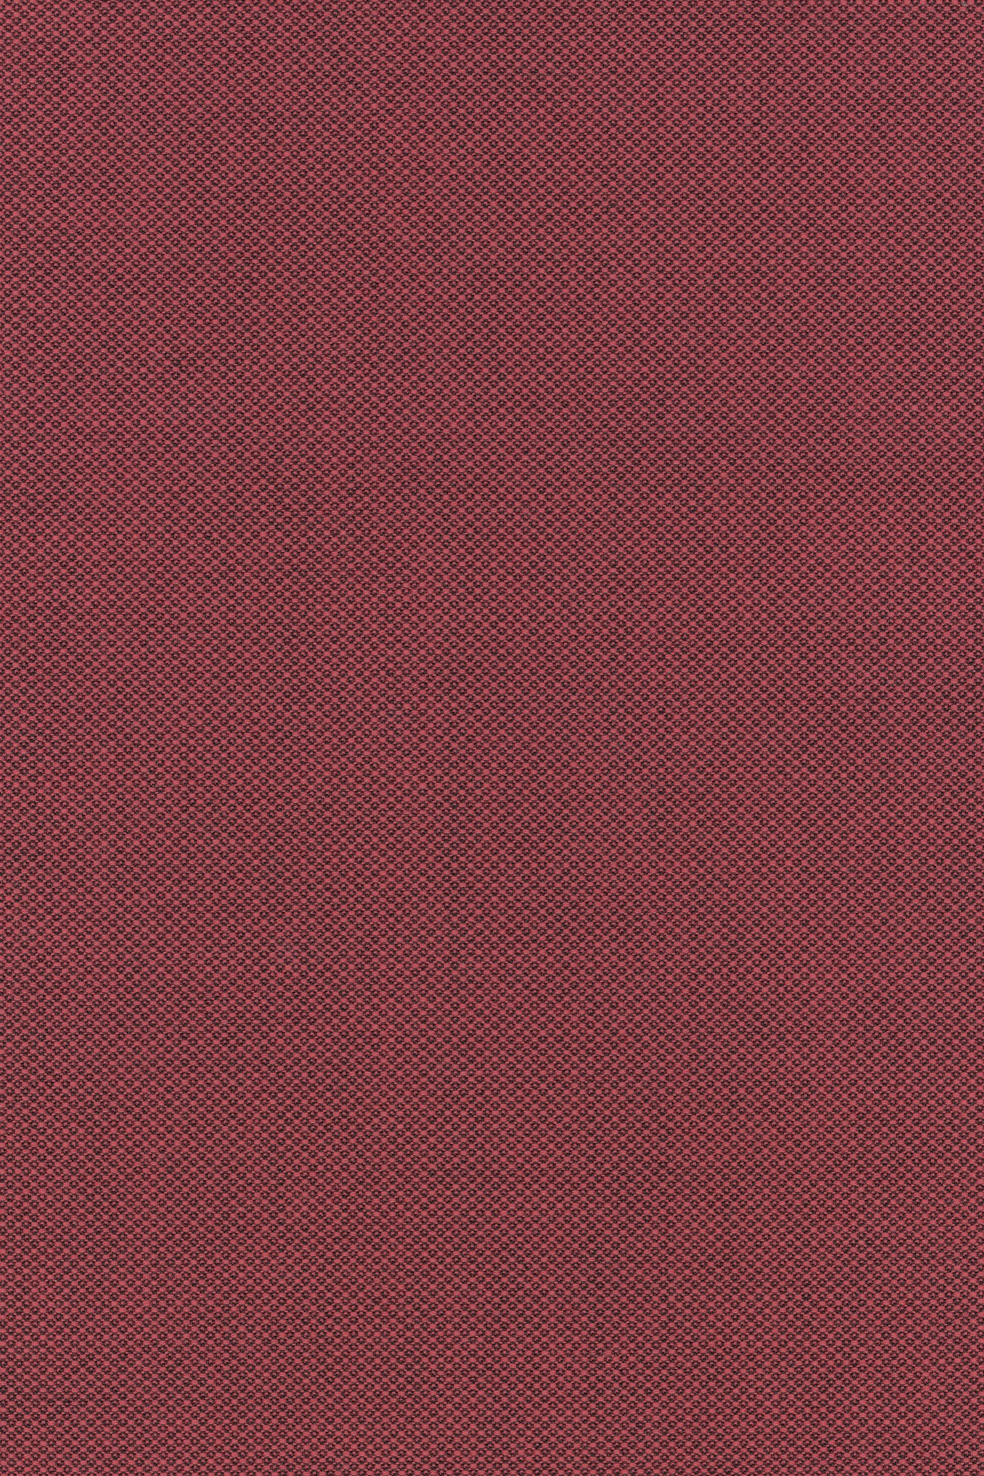 Fabric sample Fiord red